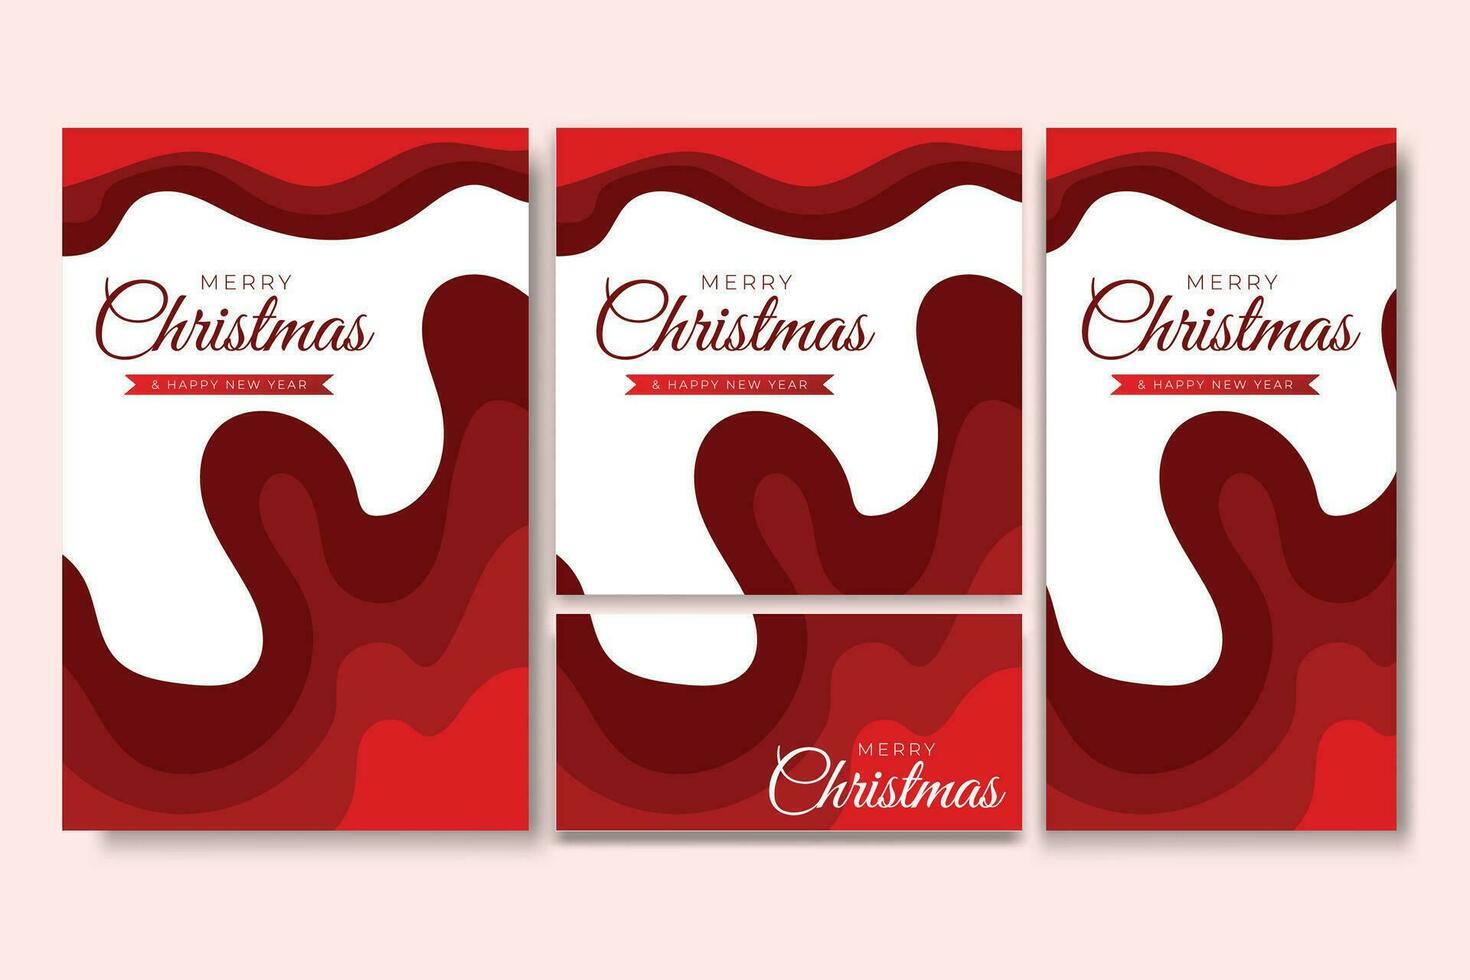 Merry Christmas Flyer and Social media Bundle Set Abstract Background vector